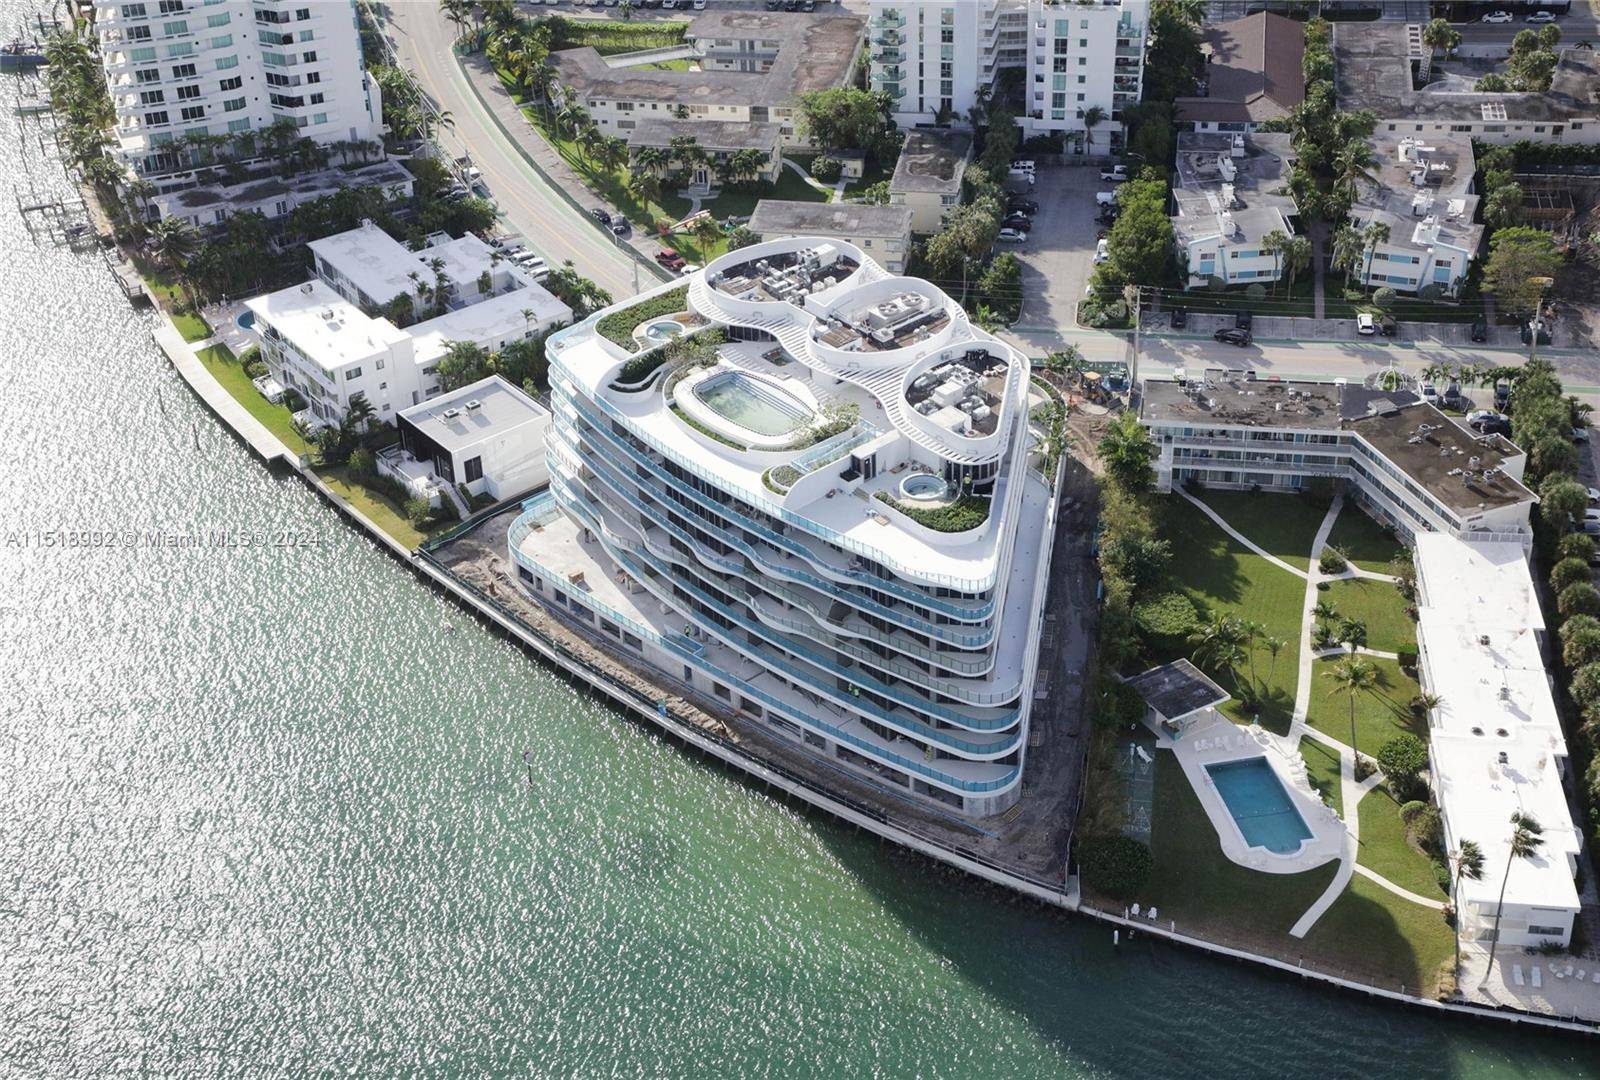 Forty one luxurious bayfront residences in Bay Harbor Islands inspired by the shimmering waters of Florida and all of the pleasure and possibilities that North Miami Beach has to offer.